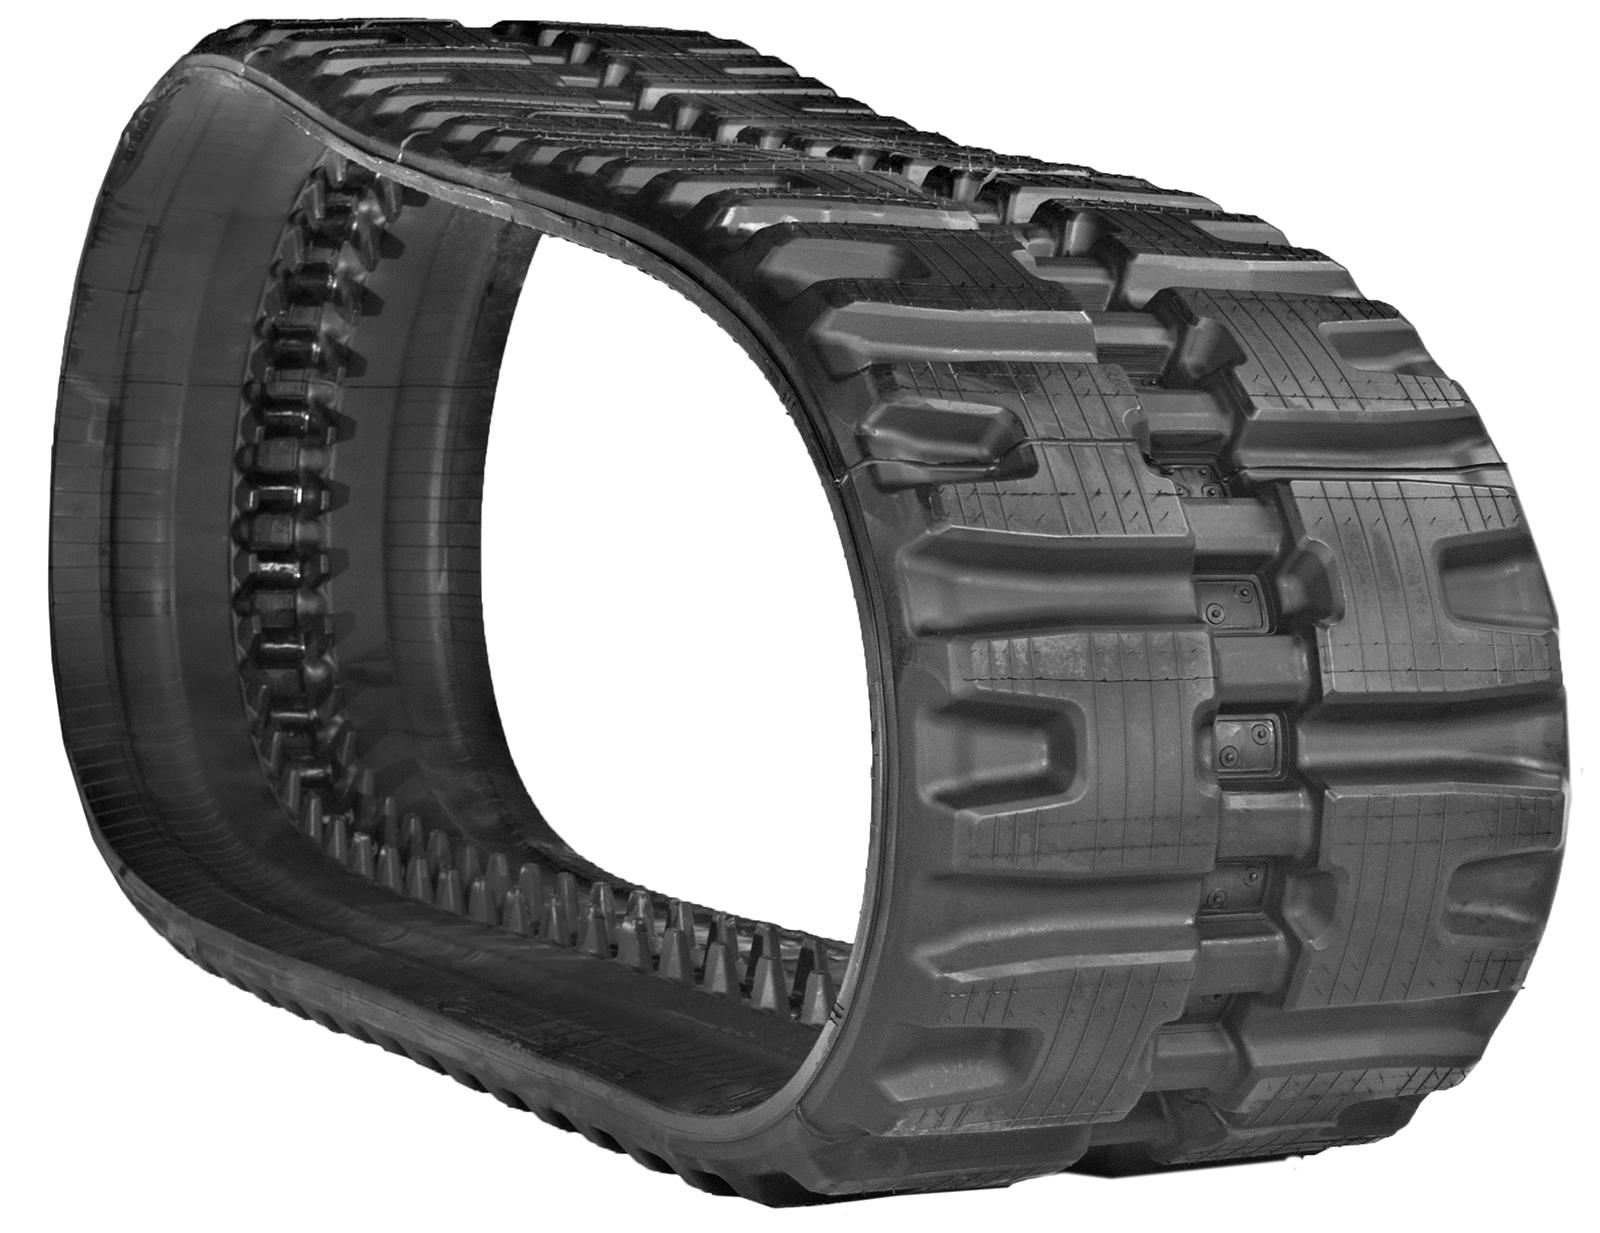 set of 2 16" camso extreme duty hxd pattern rubber tracks (400x86bx56)